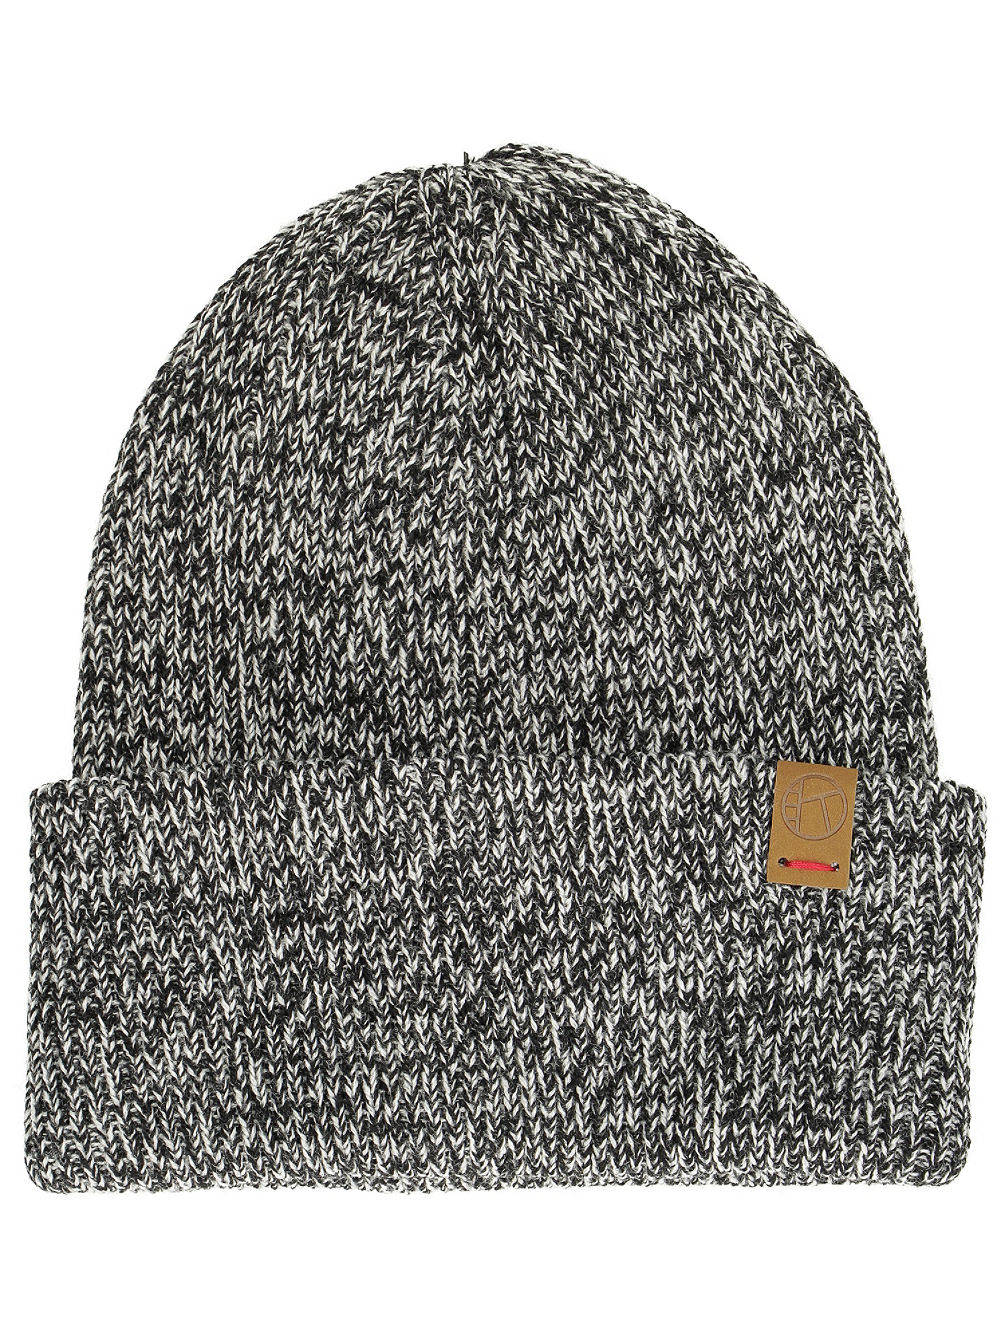 Andes Beanie